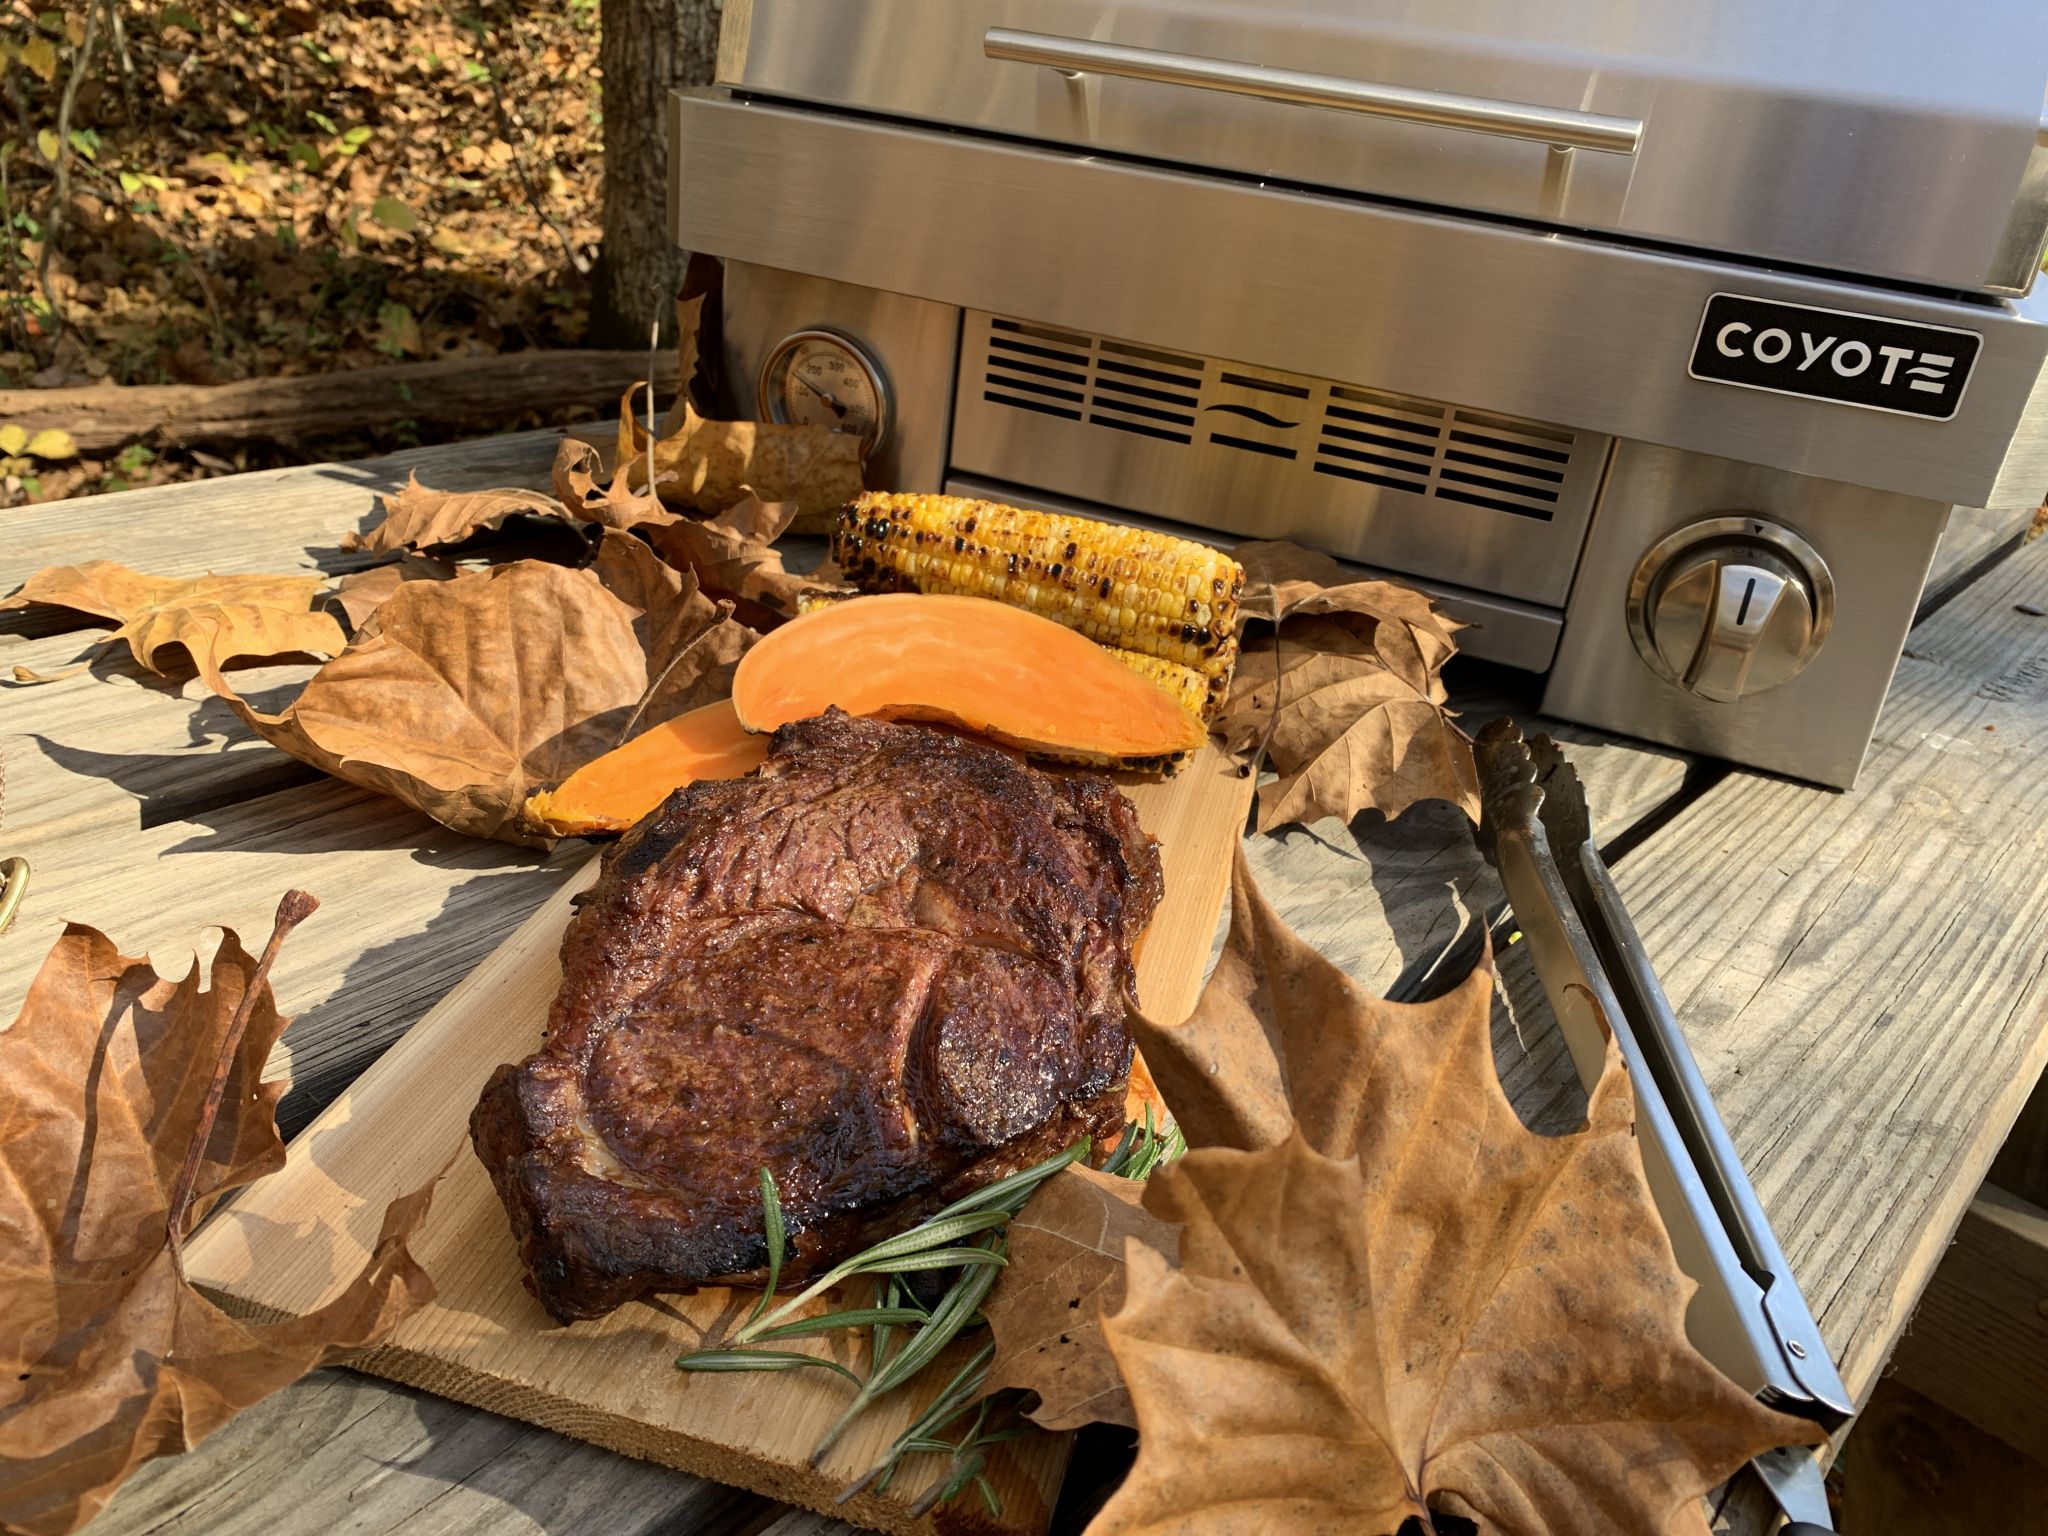 Steak and Vegetables Beside Coyote Portable Grill